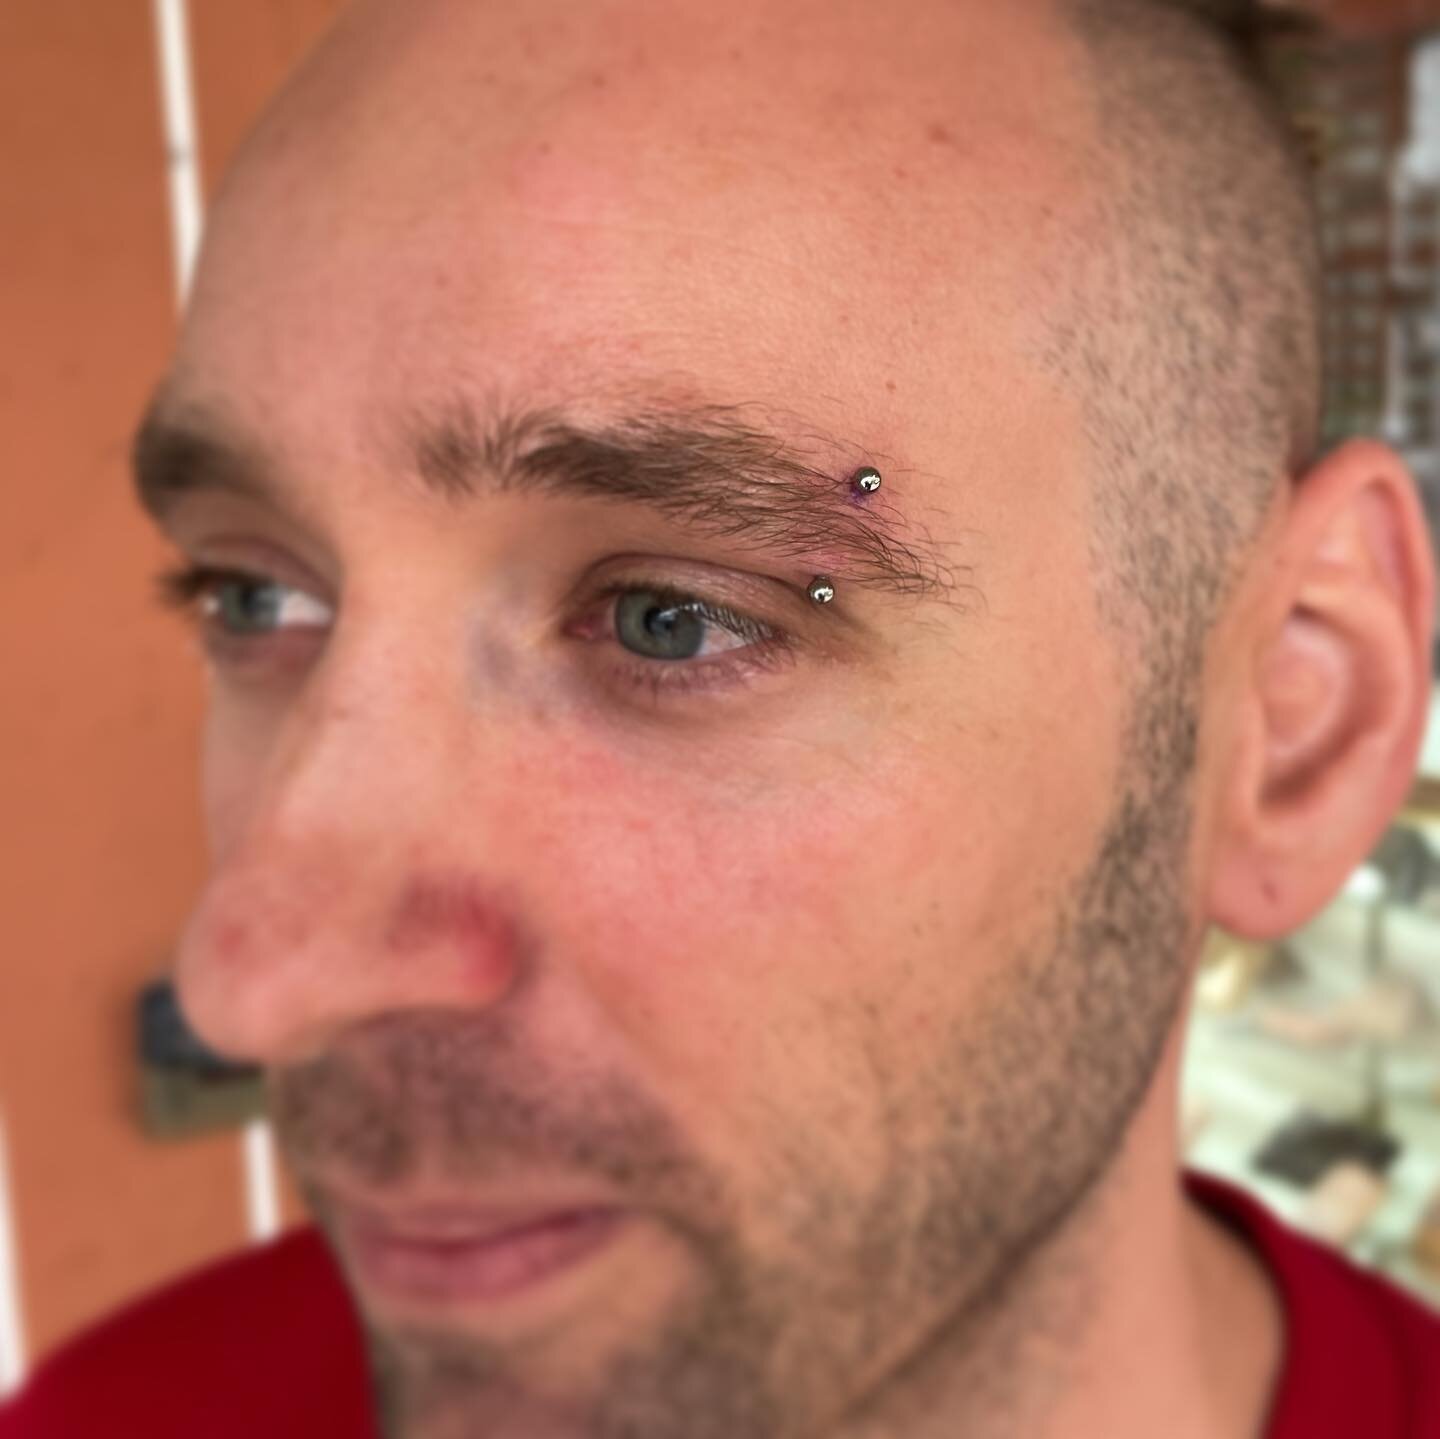 @16gmike was nice enough to let me do my 1st eyebrow piercing on him ✨14g 3/8&rdquo; f136 titanium curved barbell from @leroifinejewellery ✨